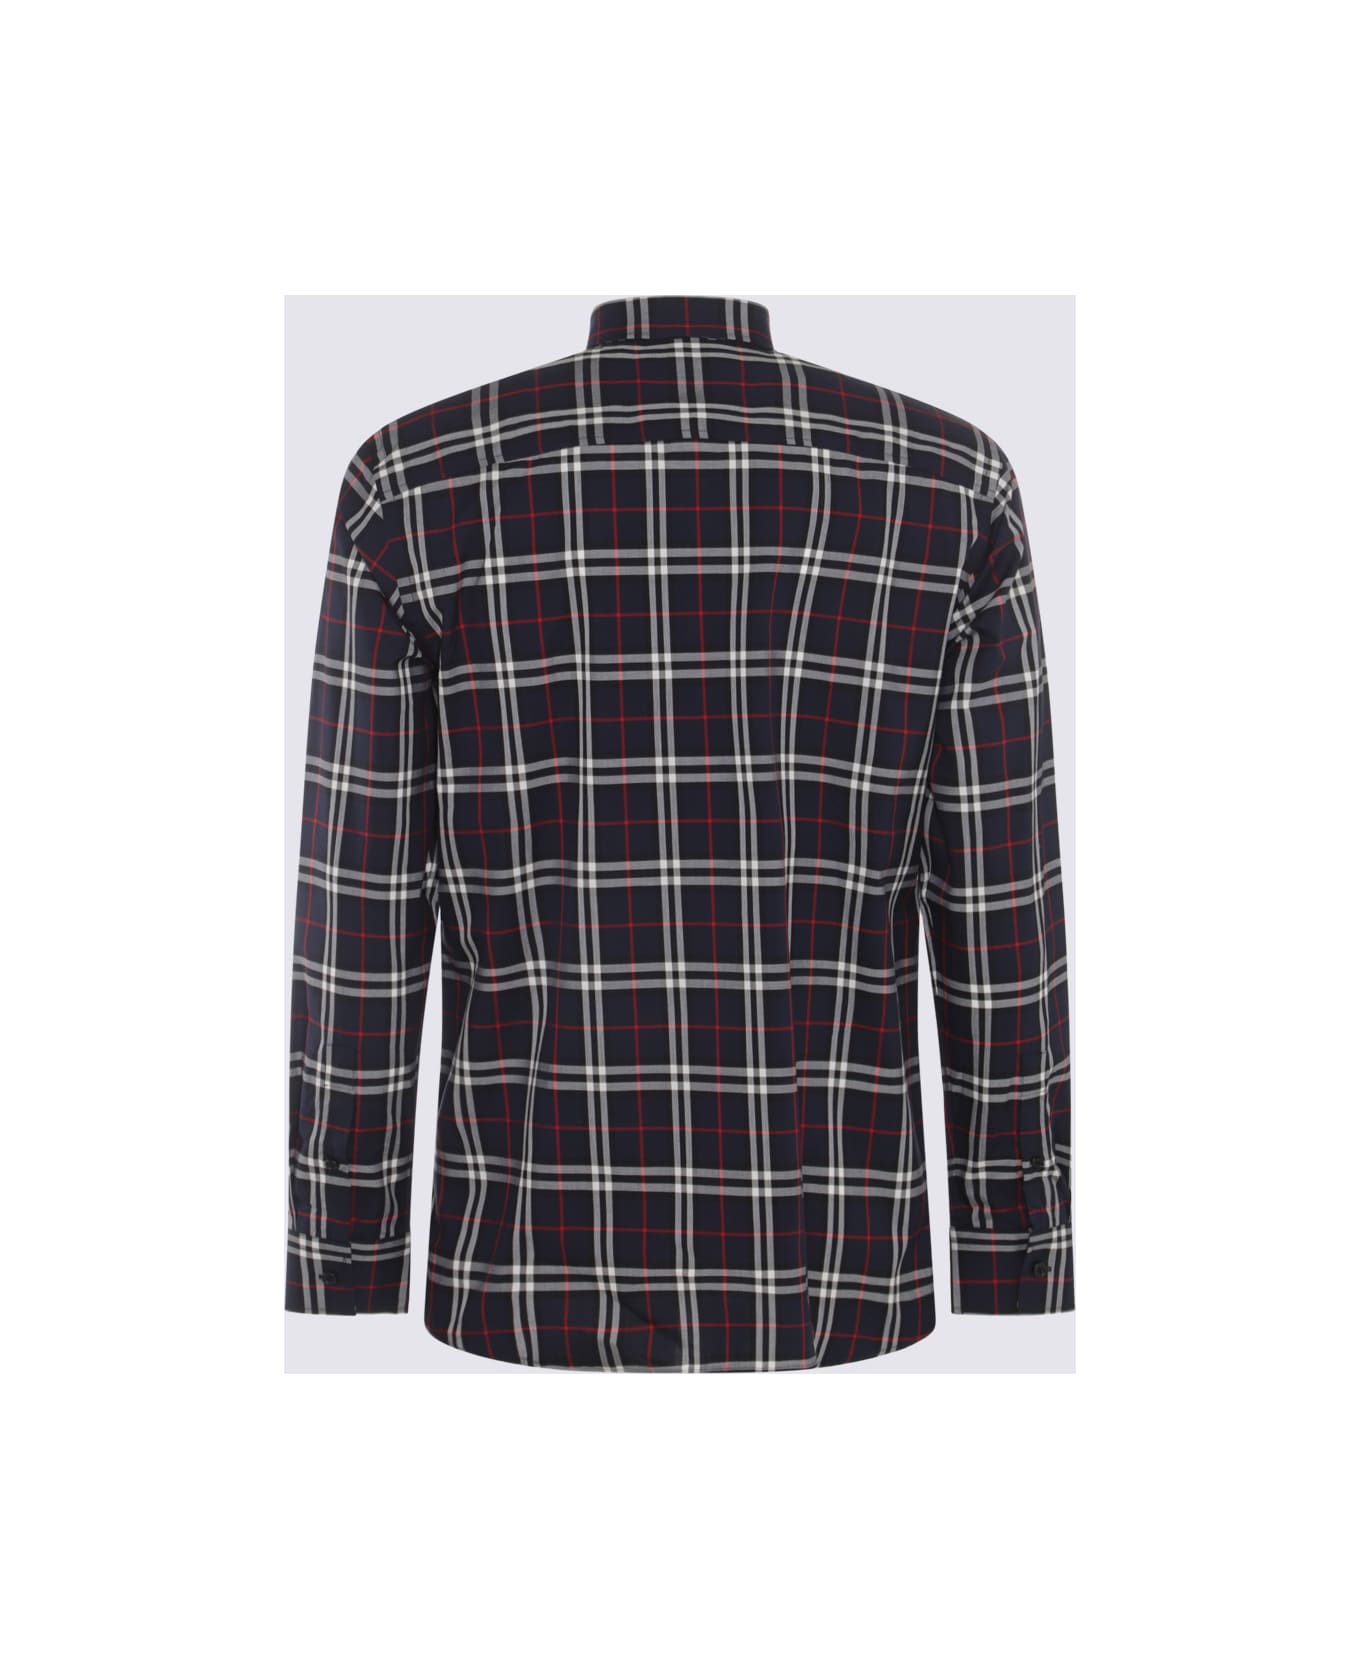 Burberry Navy And Red Cotton Shirt - NAVY IP CHECK